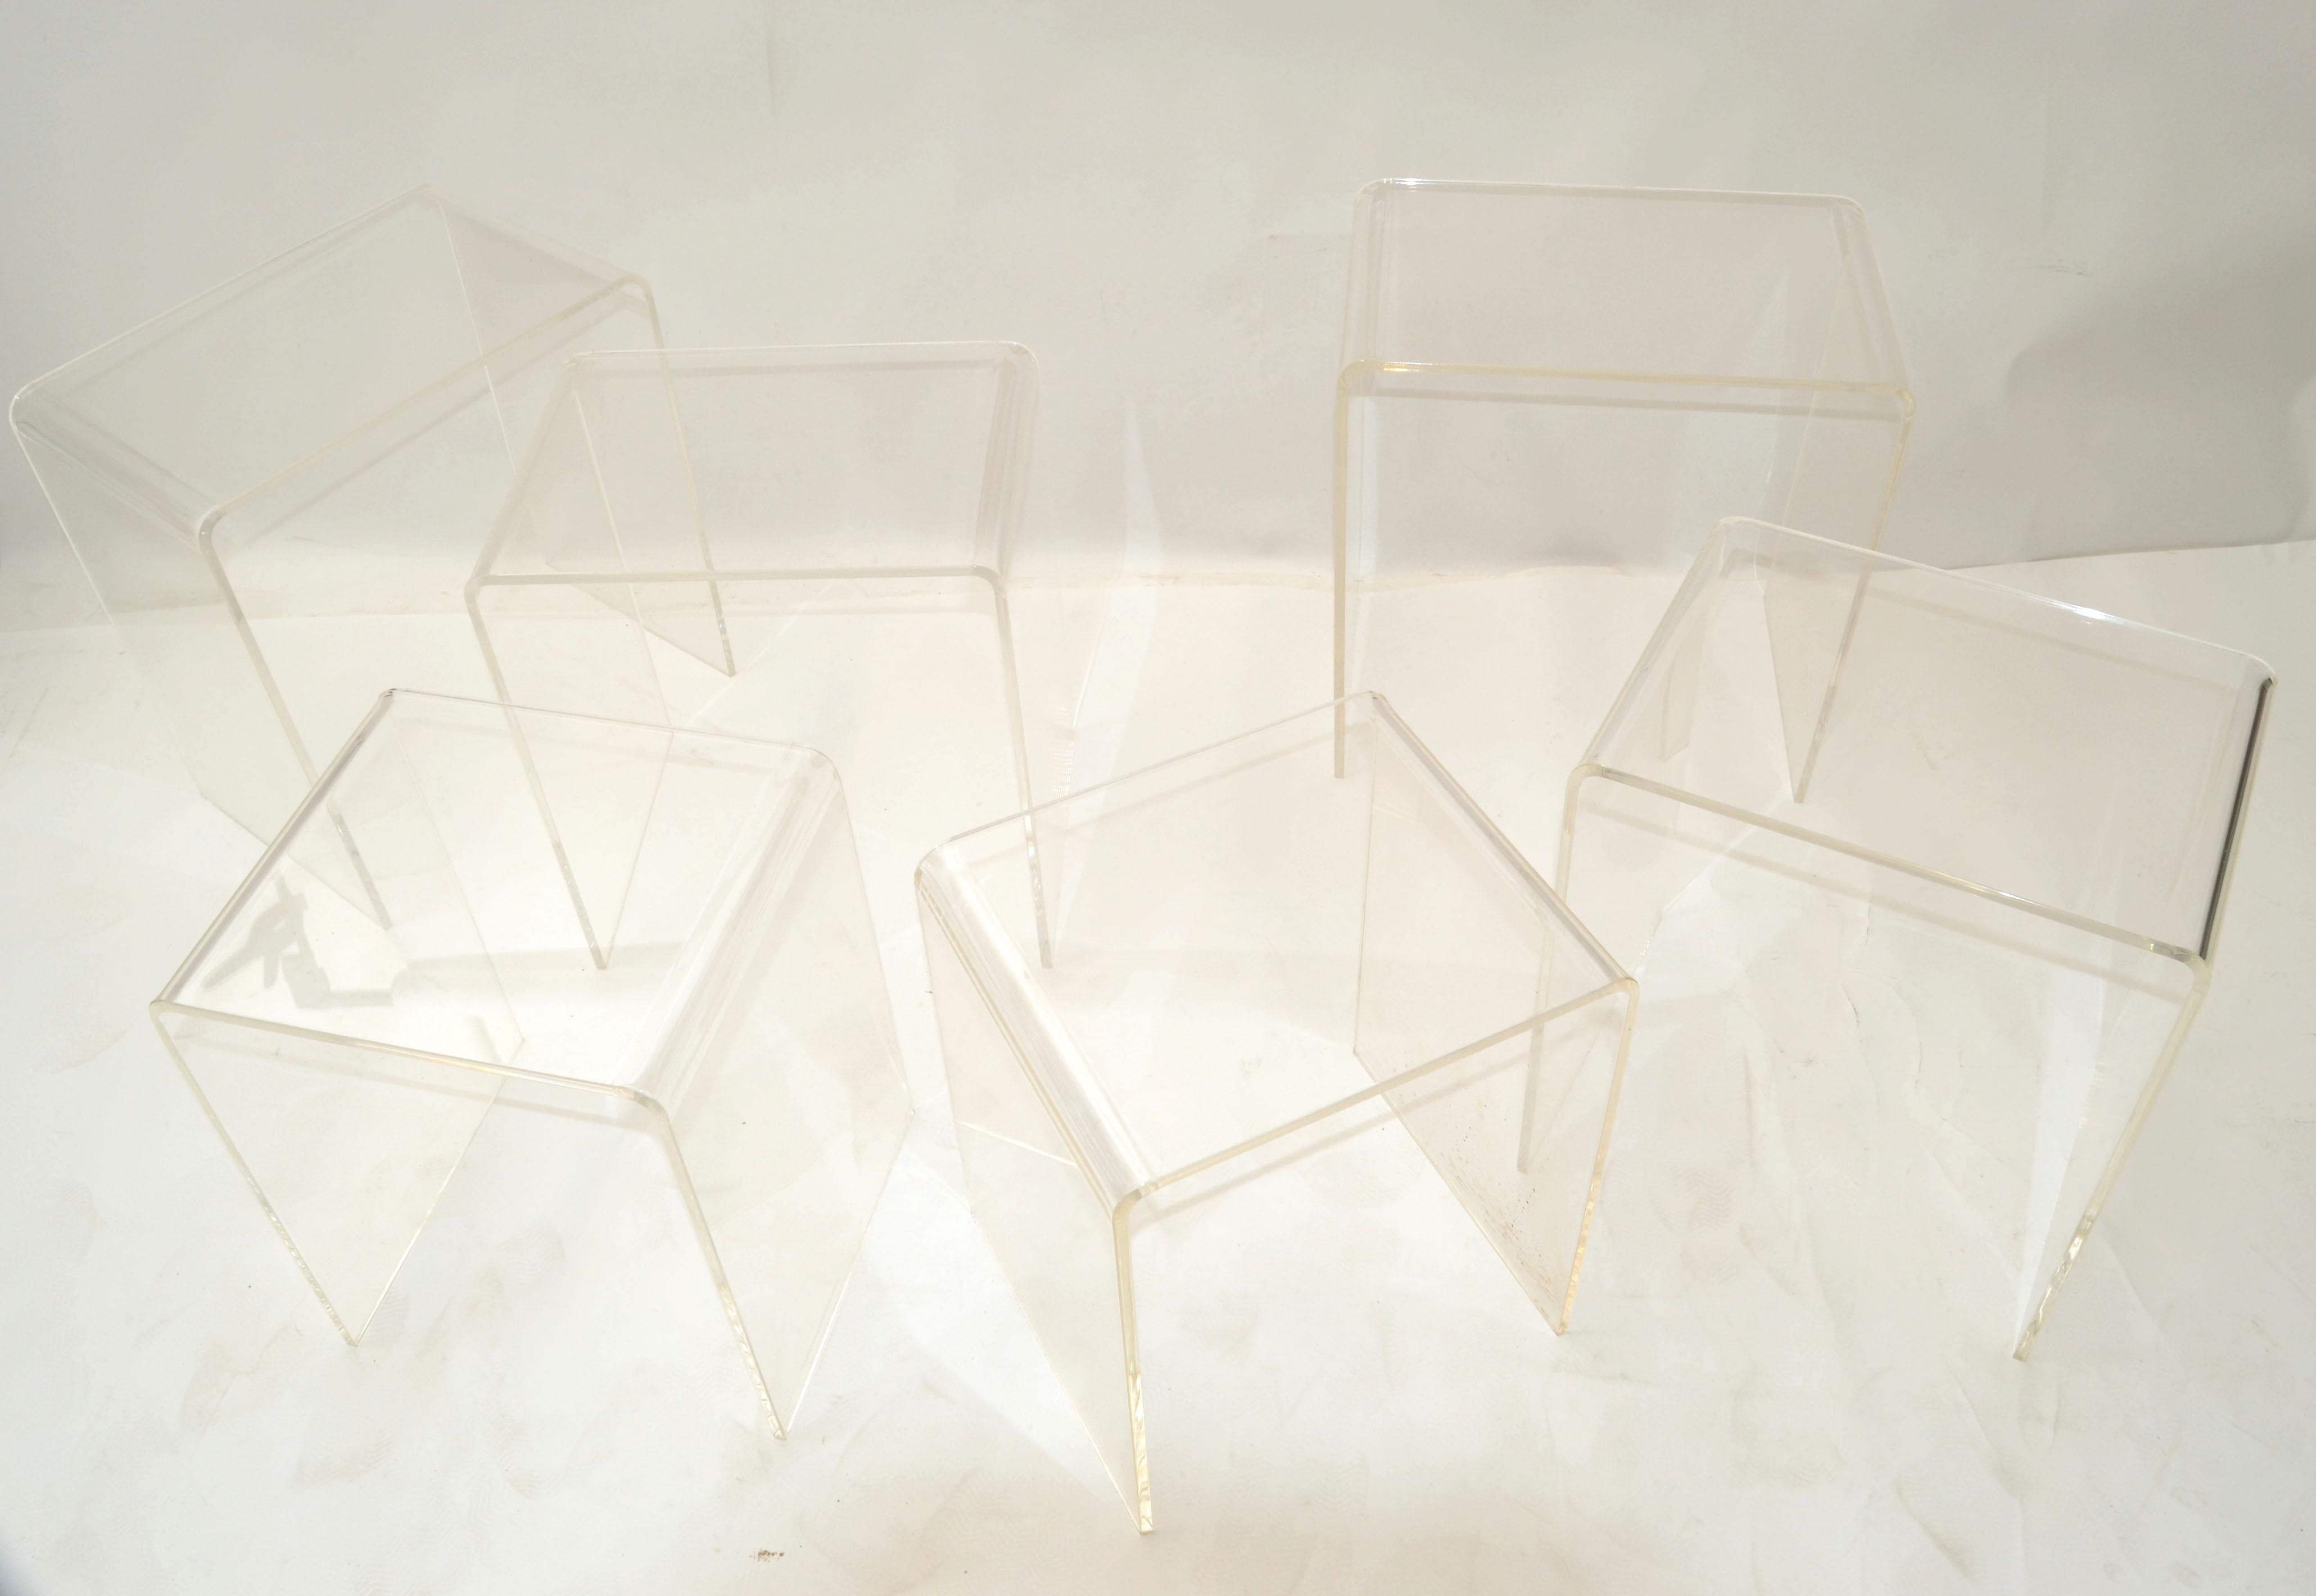 Pair of Lucite Waterfall Nesting Tables / Stacking Tables, Stools, Set of 3 In Good Condition For Sale In Miami, FL